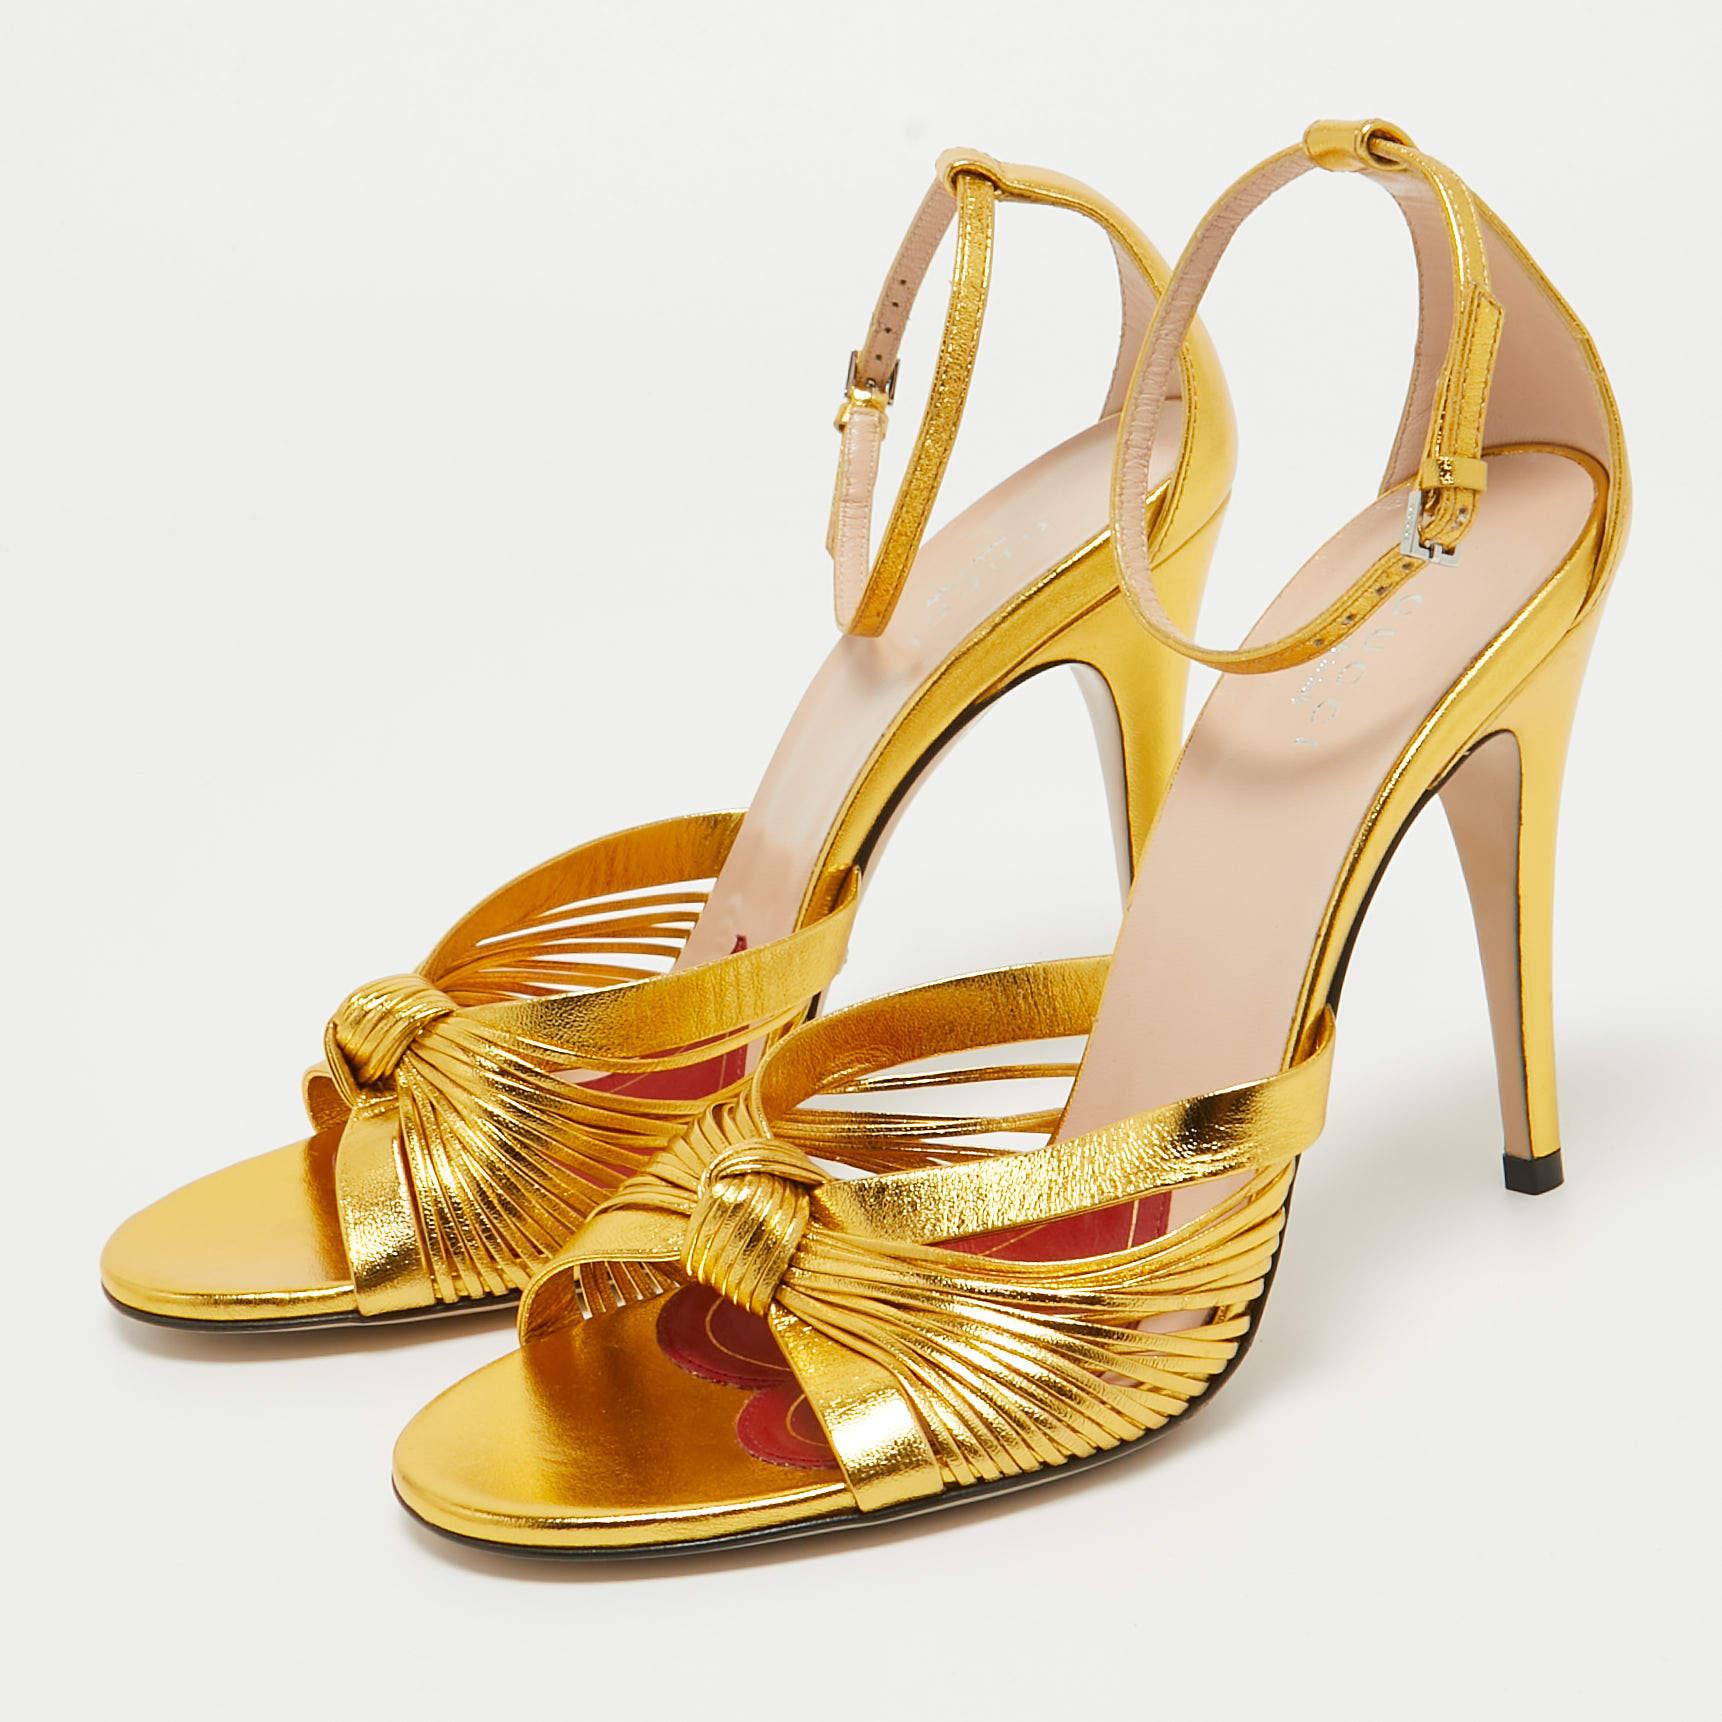 Gucci Metallic Gold Leather Allie Ankle Strap Sandals Size 38.5 2